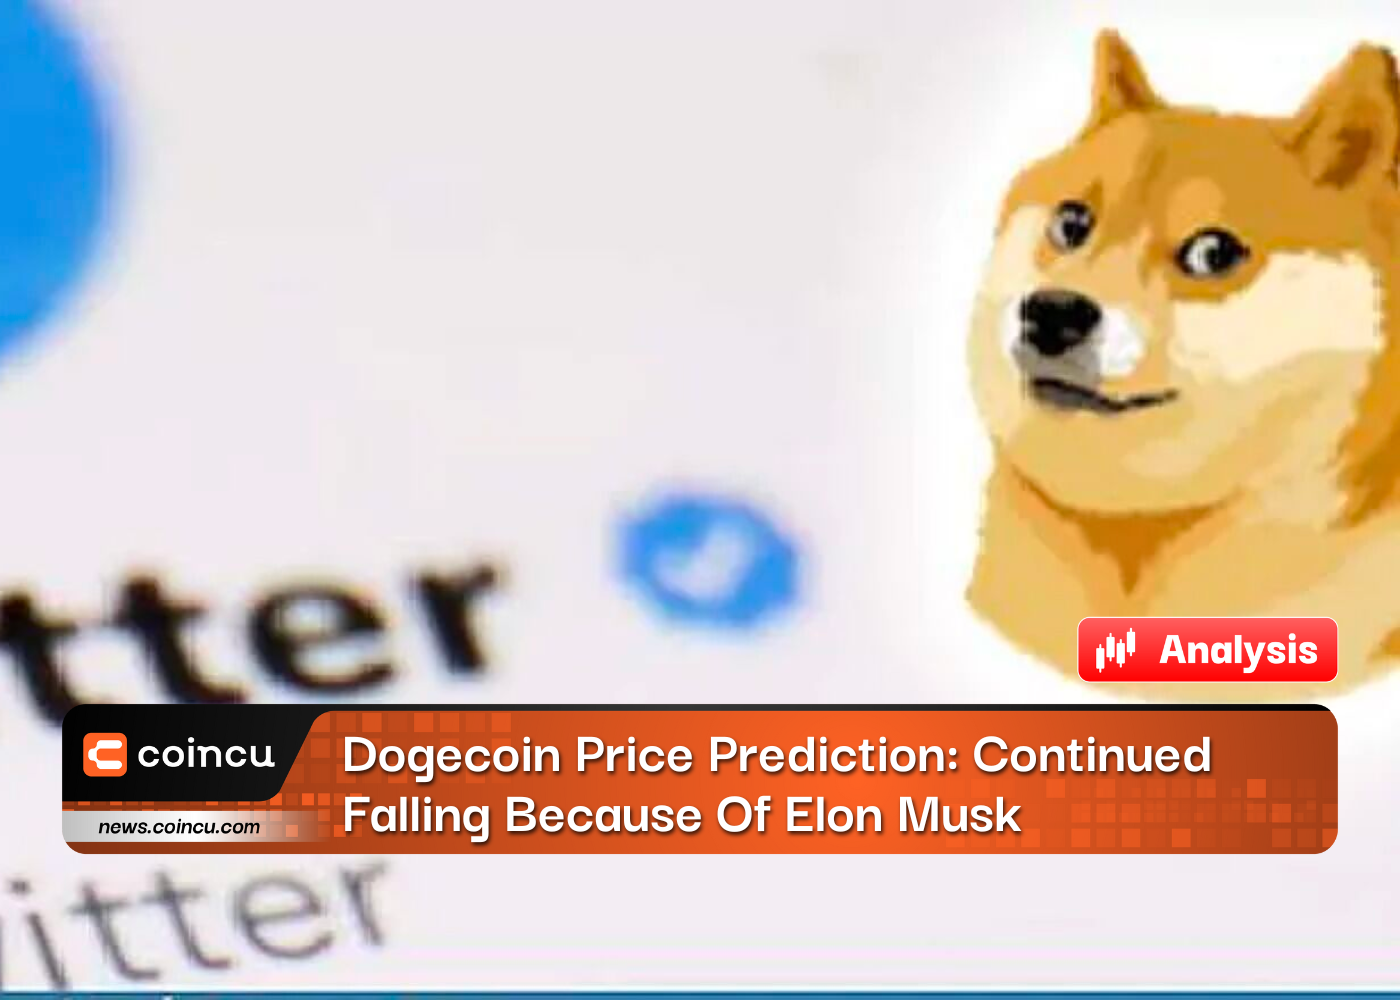 Dogecoin Price Prediction: Continued Falling Because Of Elon Musk